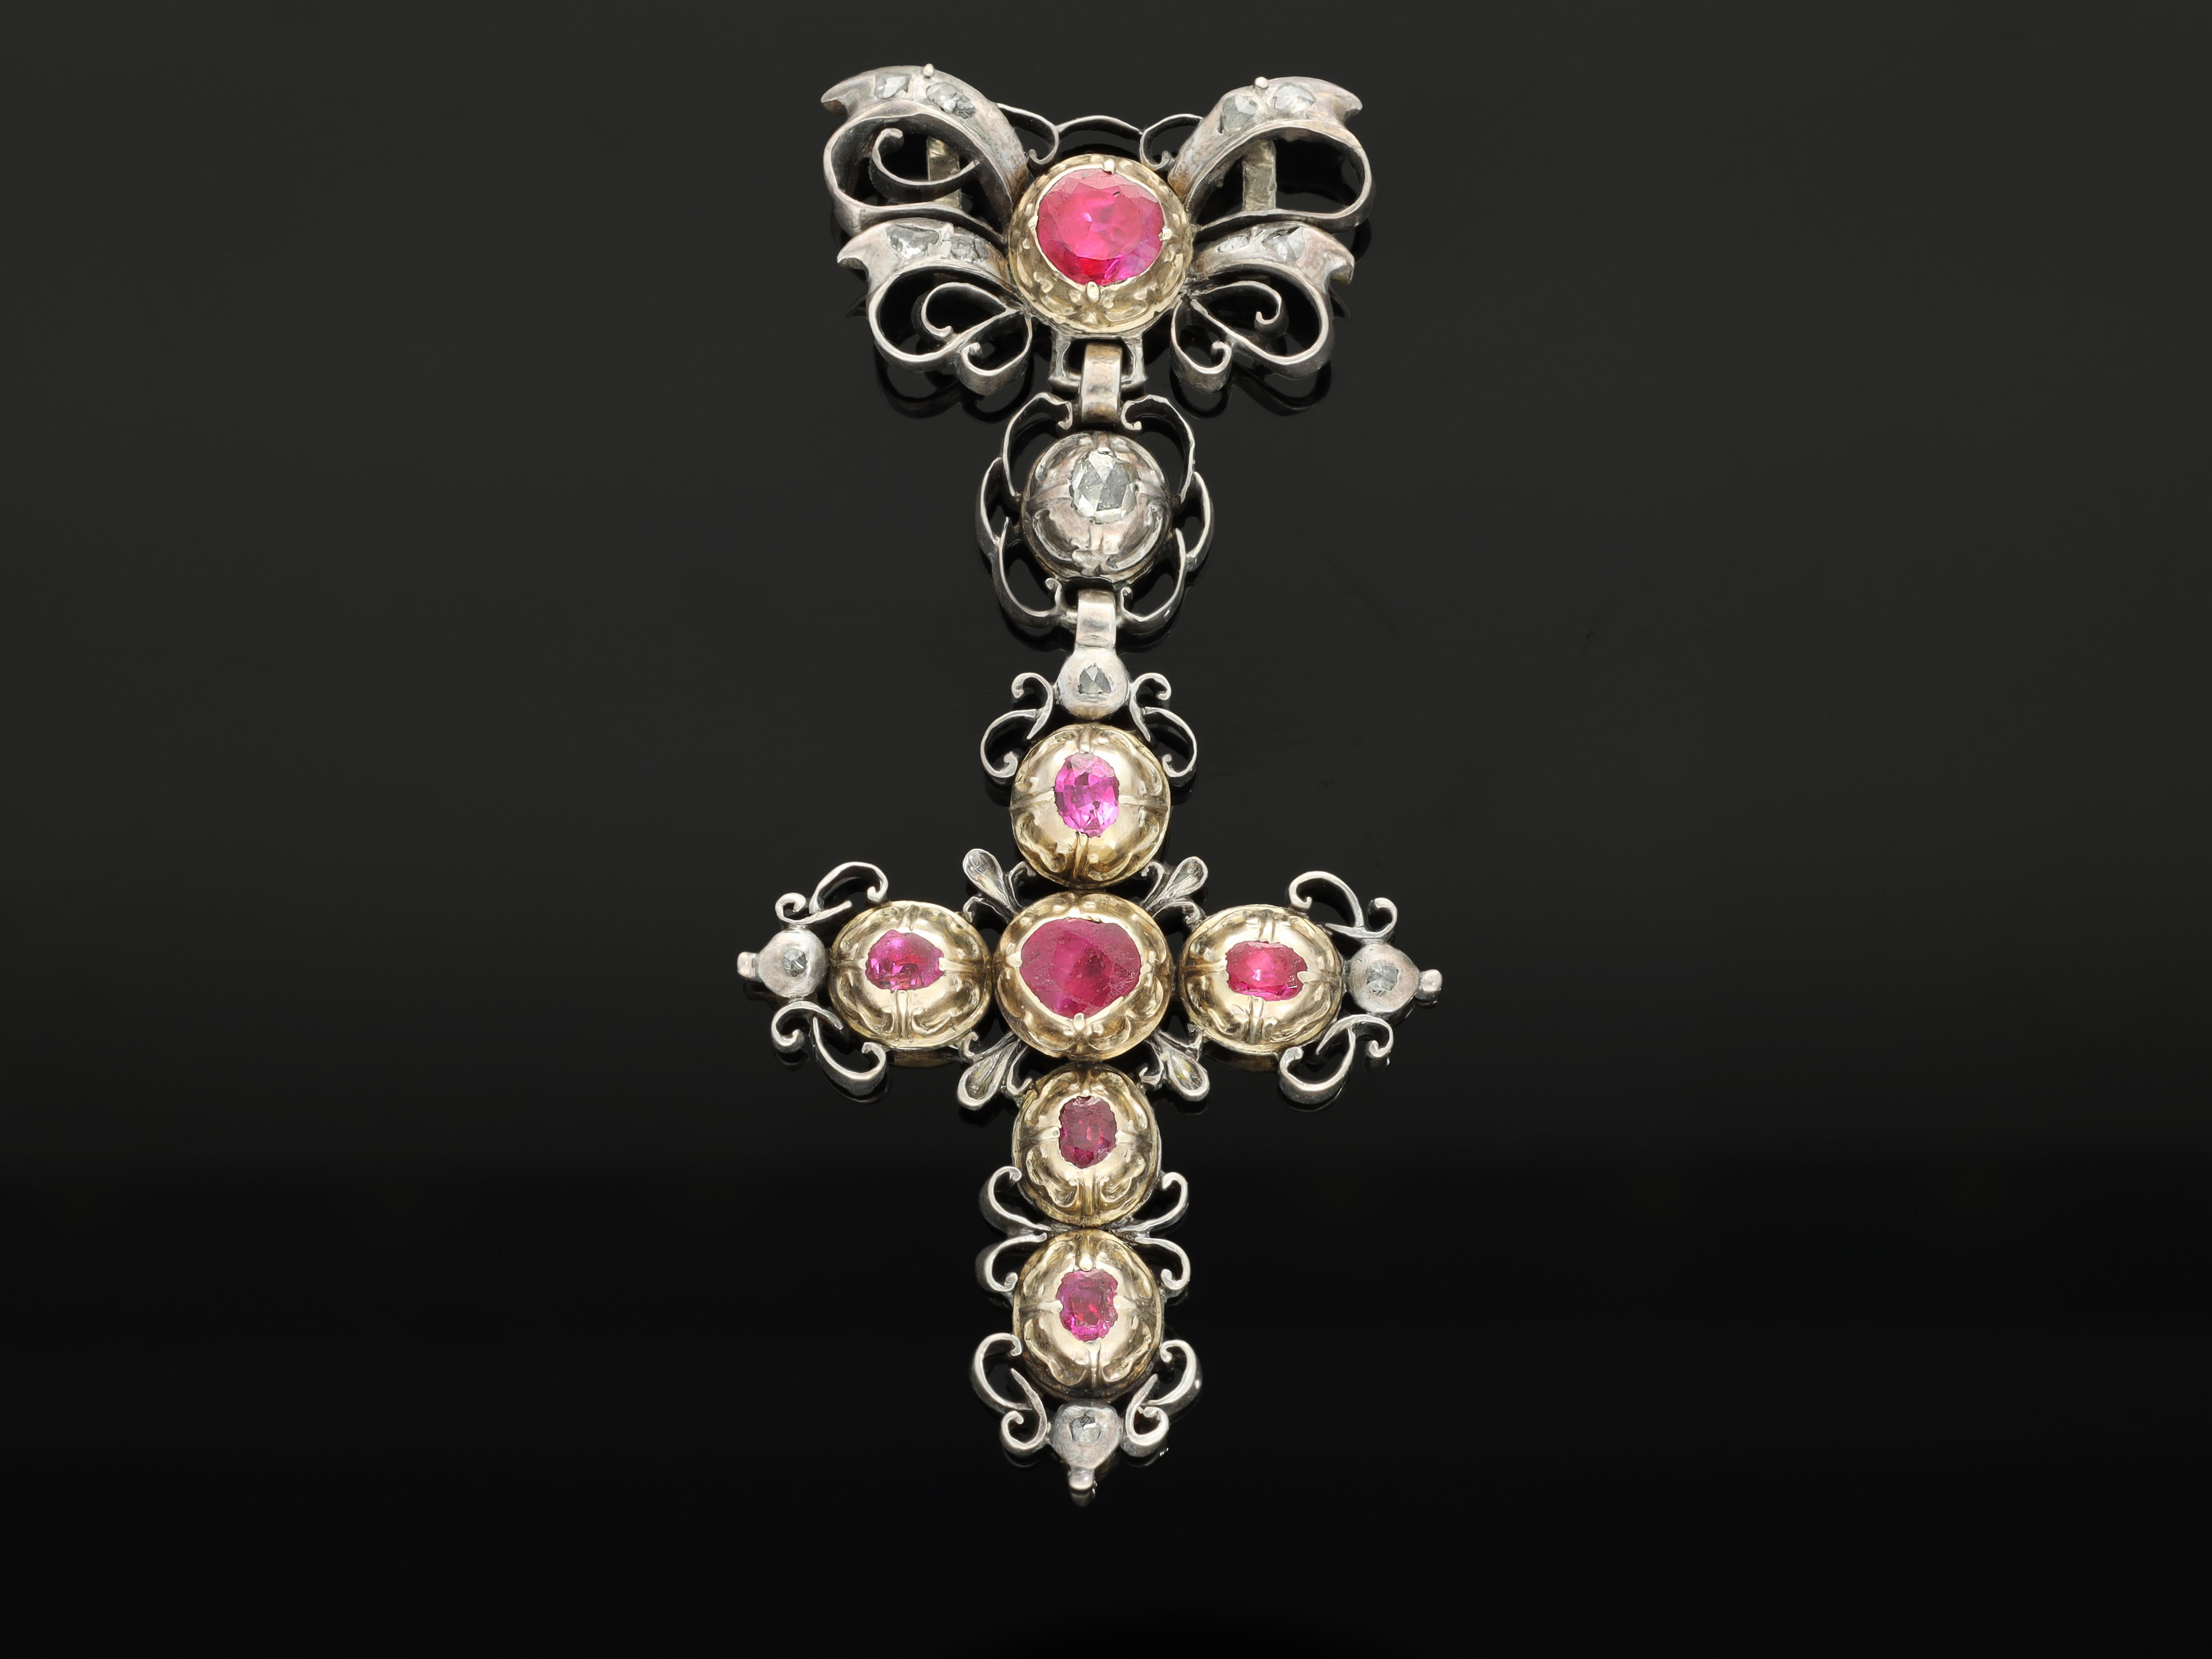 A very rare authentic 18th century neck jewel set with untreated Burma rubies! This absolutely magnificent and precious antique Georgian era cross necklace is made in highly collectible Rococo style. Rococo is famous for its curvy lines, lace-like